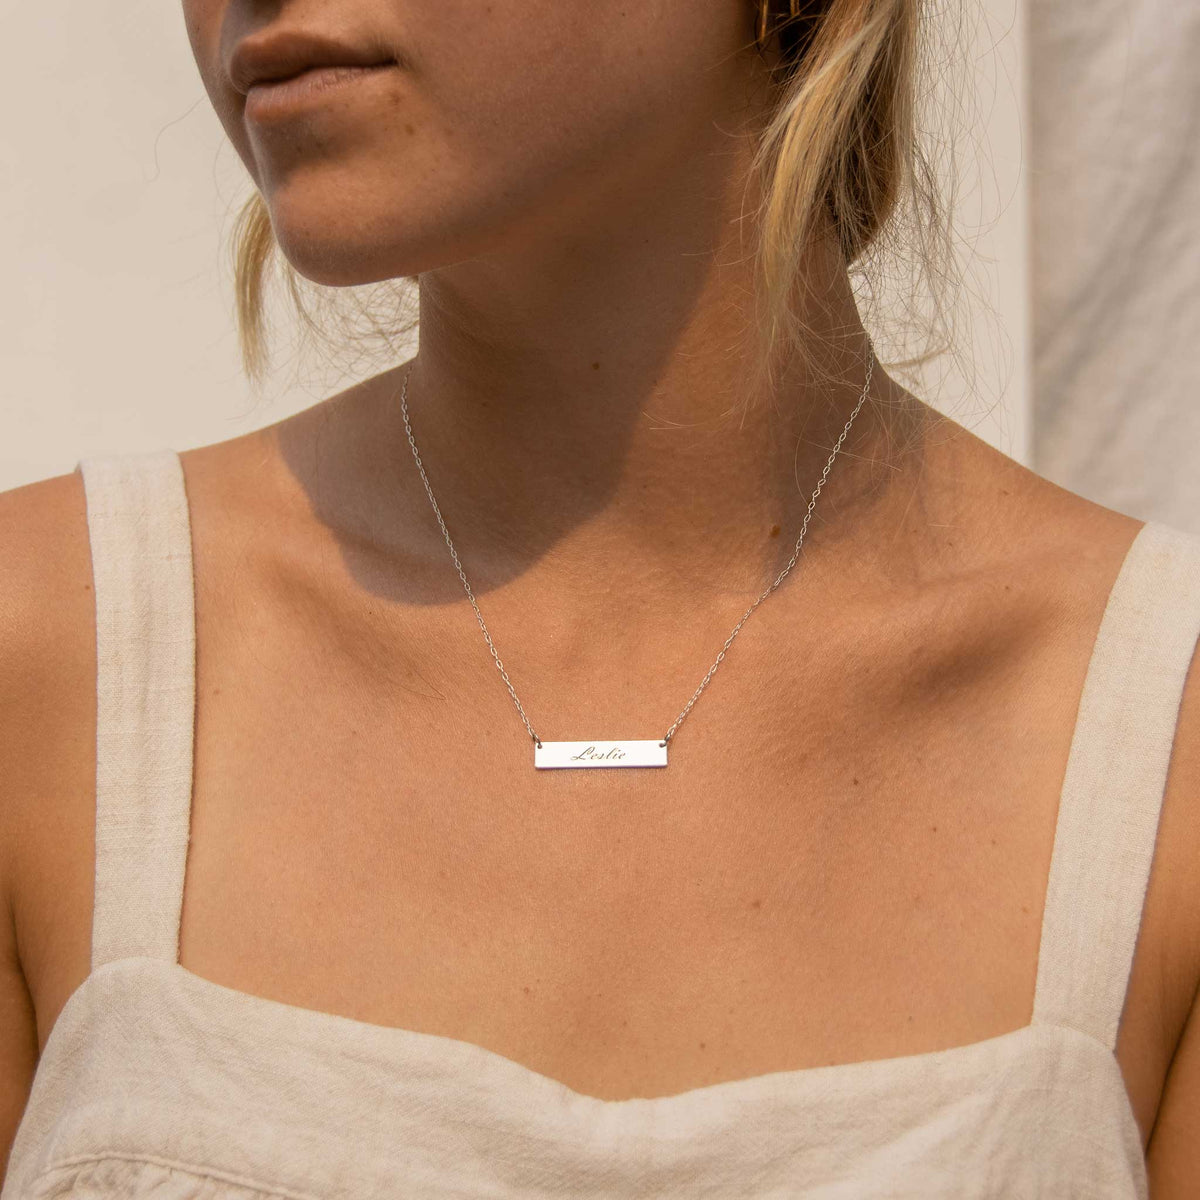 Woman wearing the silver rectangle bar necklace with Leslie engraved. 